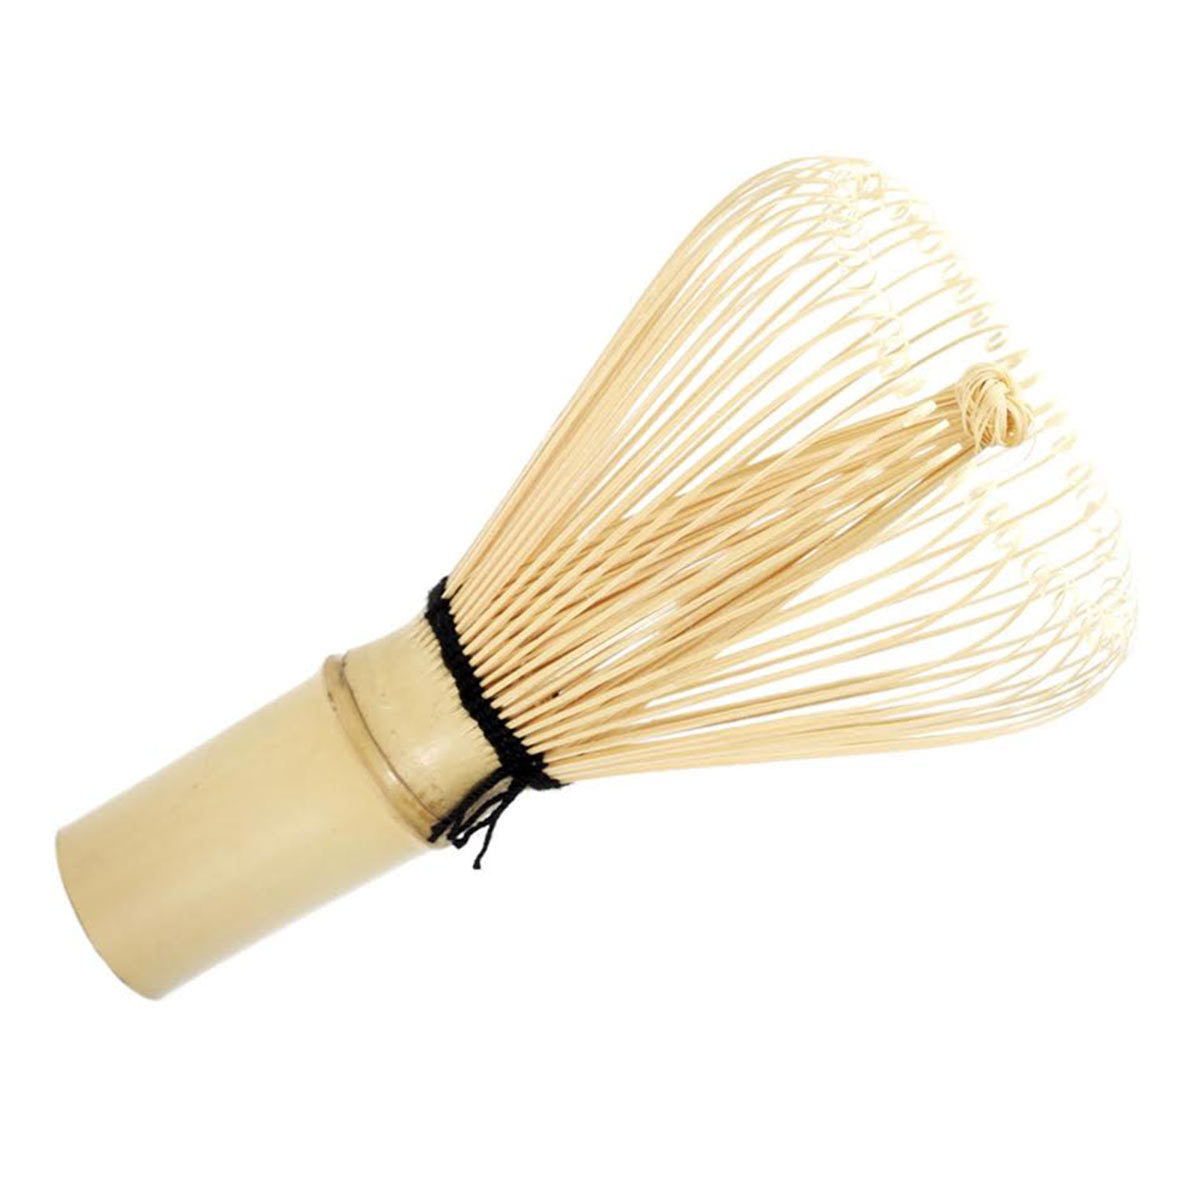 Primary image of Bamboo Whisk